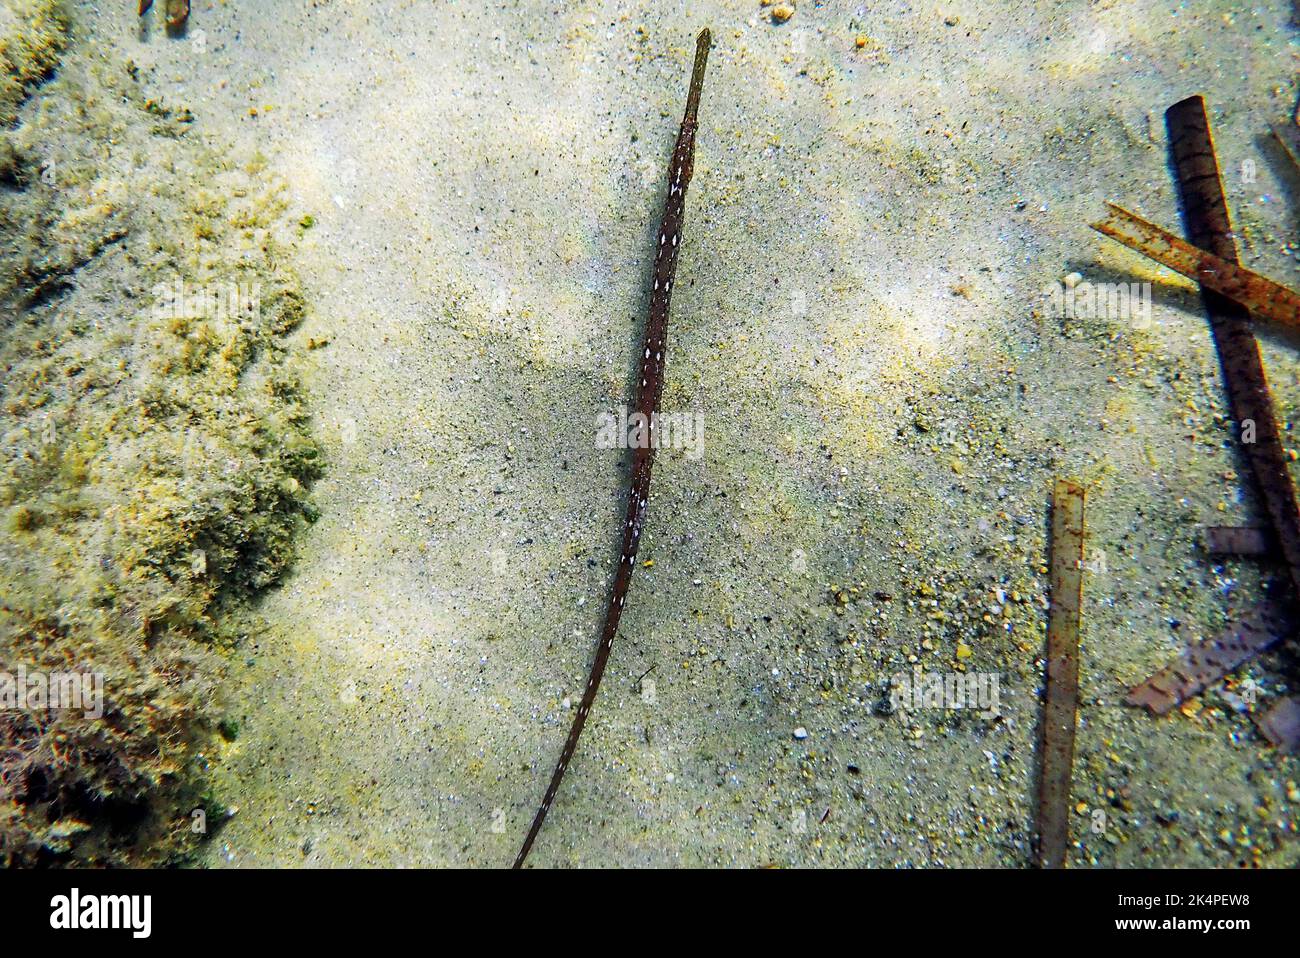 Underwater image in to the Mediterranean sea of Broadnosed pipefish - (Syngnathus typhle) Stock Photo